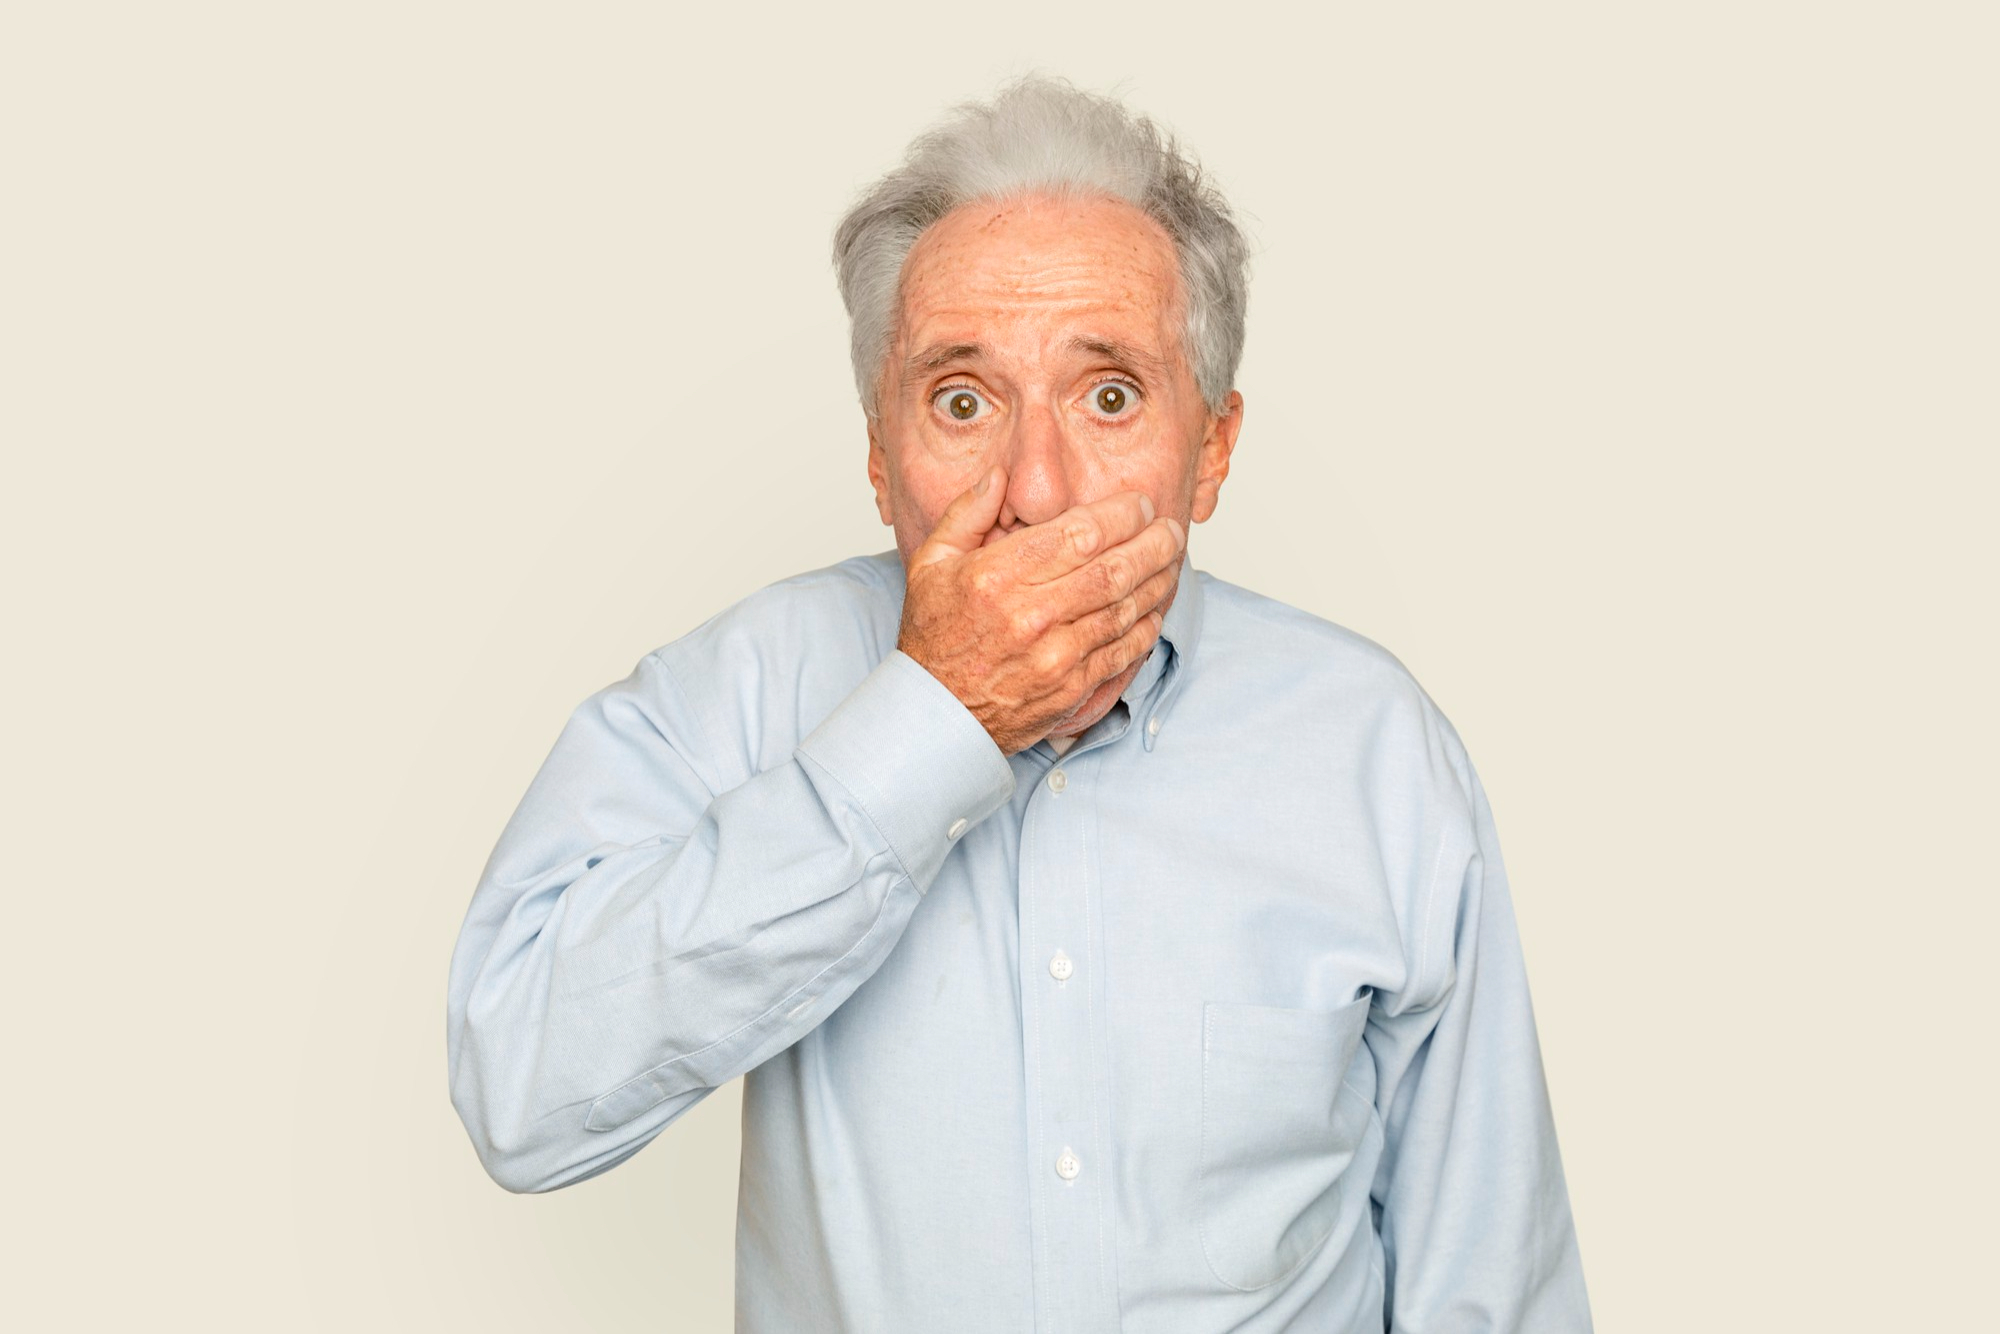 An older man covering his mouth in shock | Source: Freepik